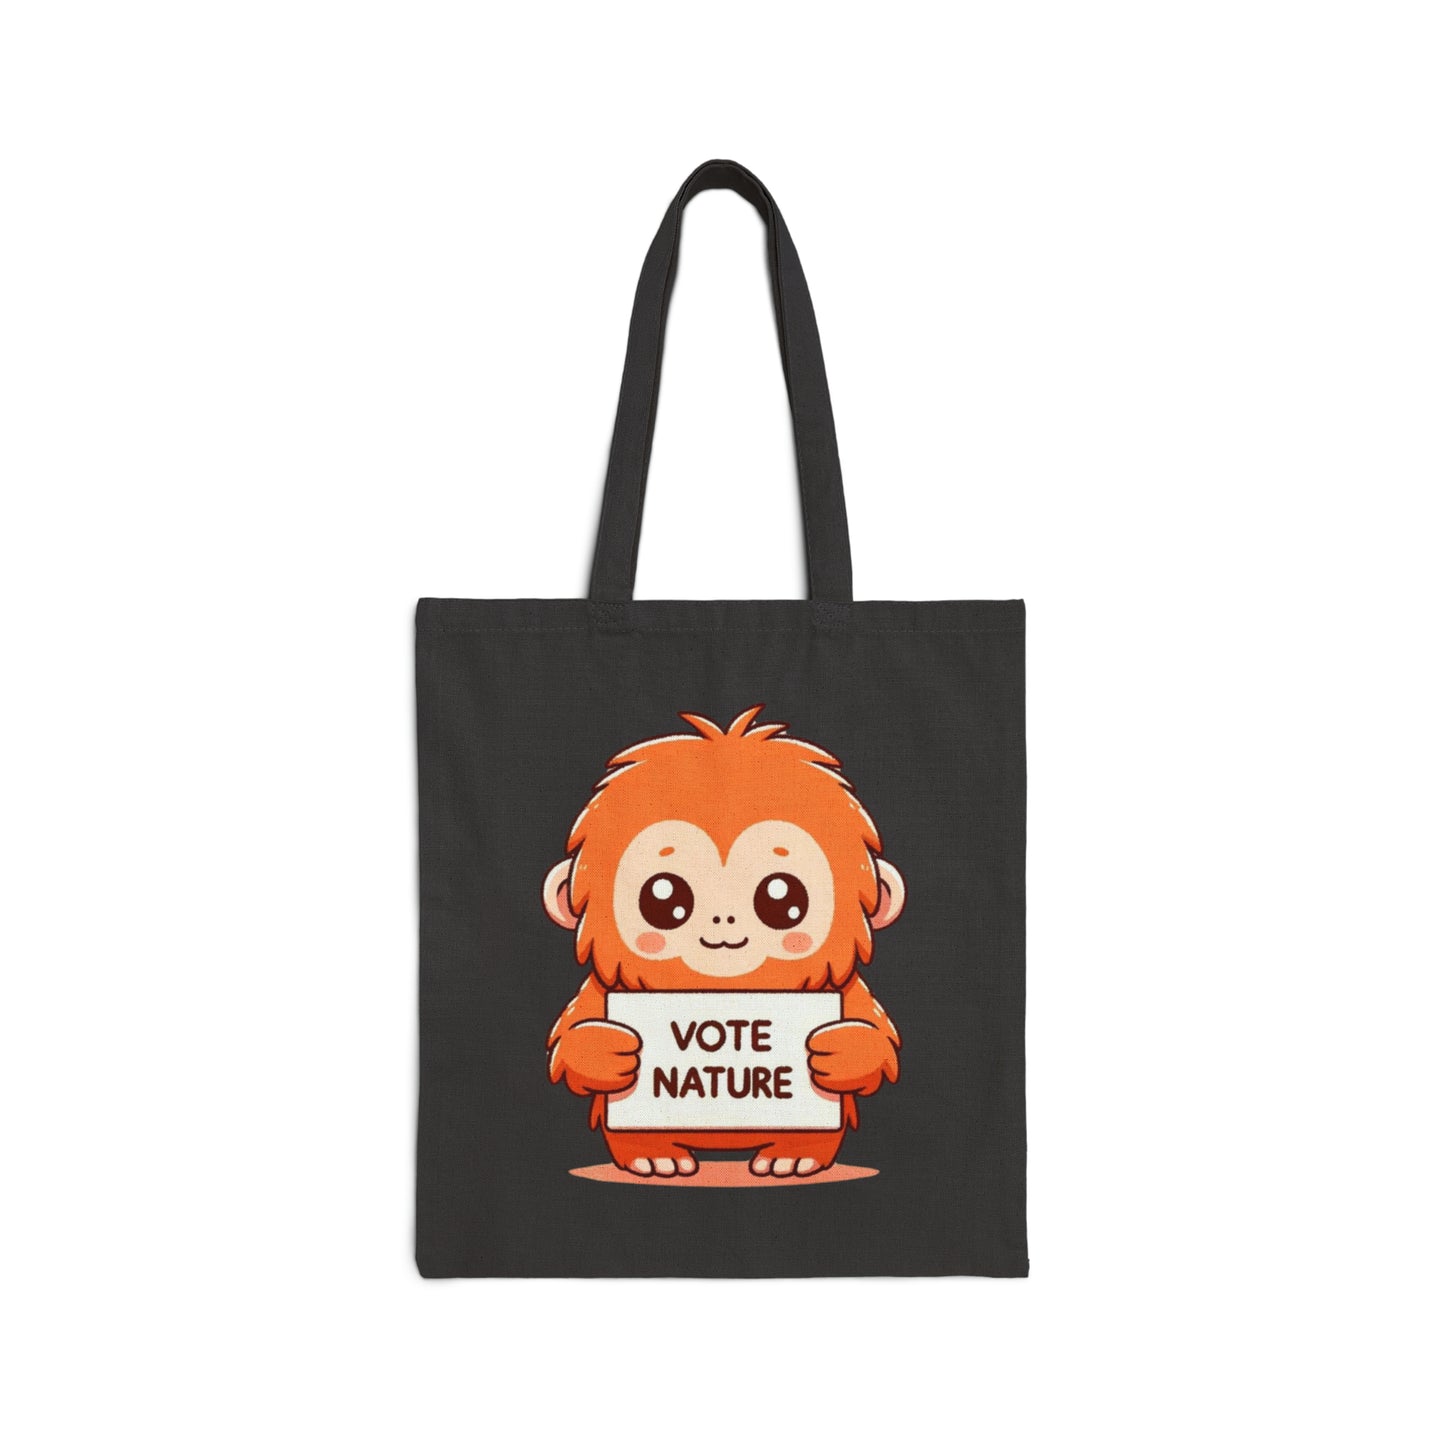 Inspirational Cute Orangutan Statement Canvas Tote Bag: Vote Nature! carry laptop, kindle, phone, notebook, goodies to work/coffee shop